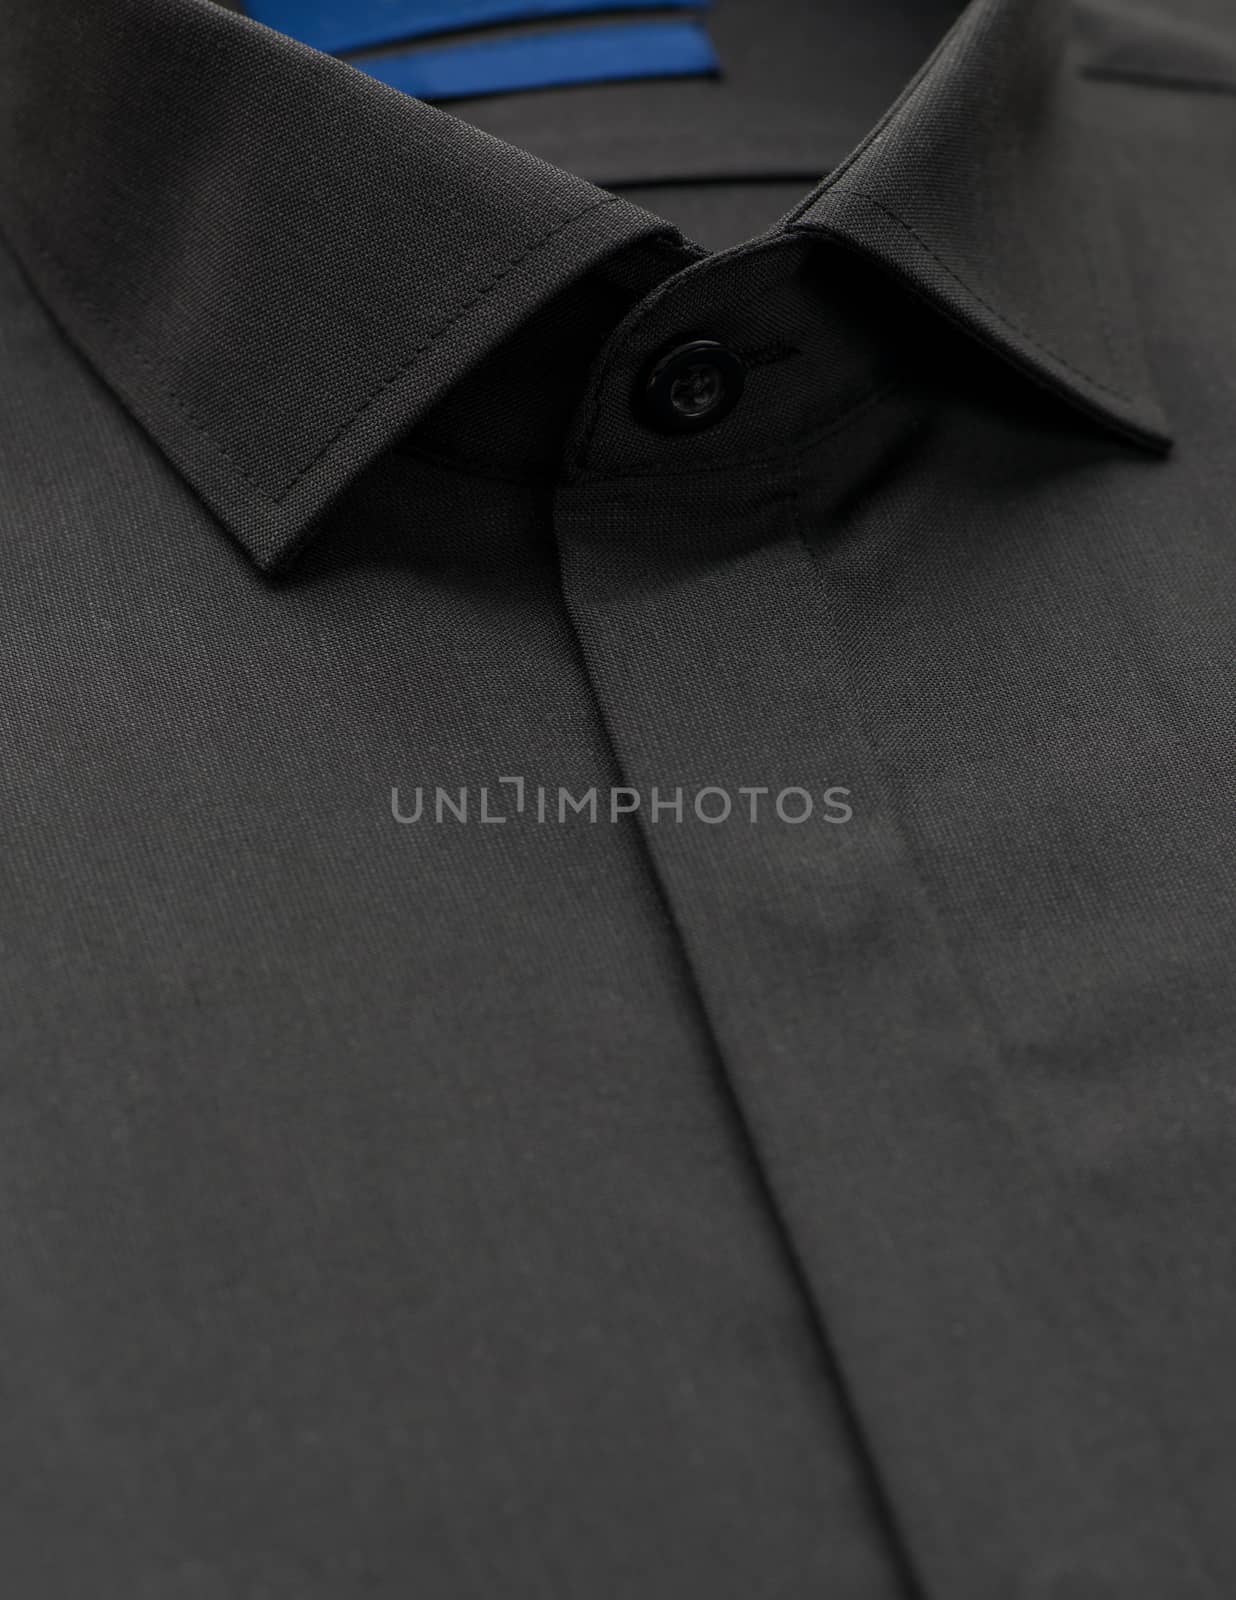 black shirt with a focus on the collar and button, close-up